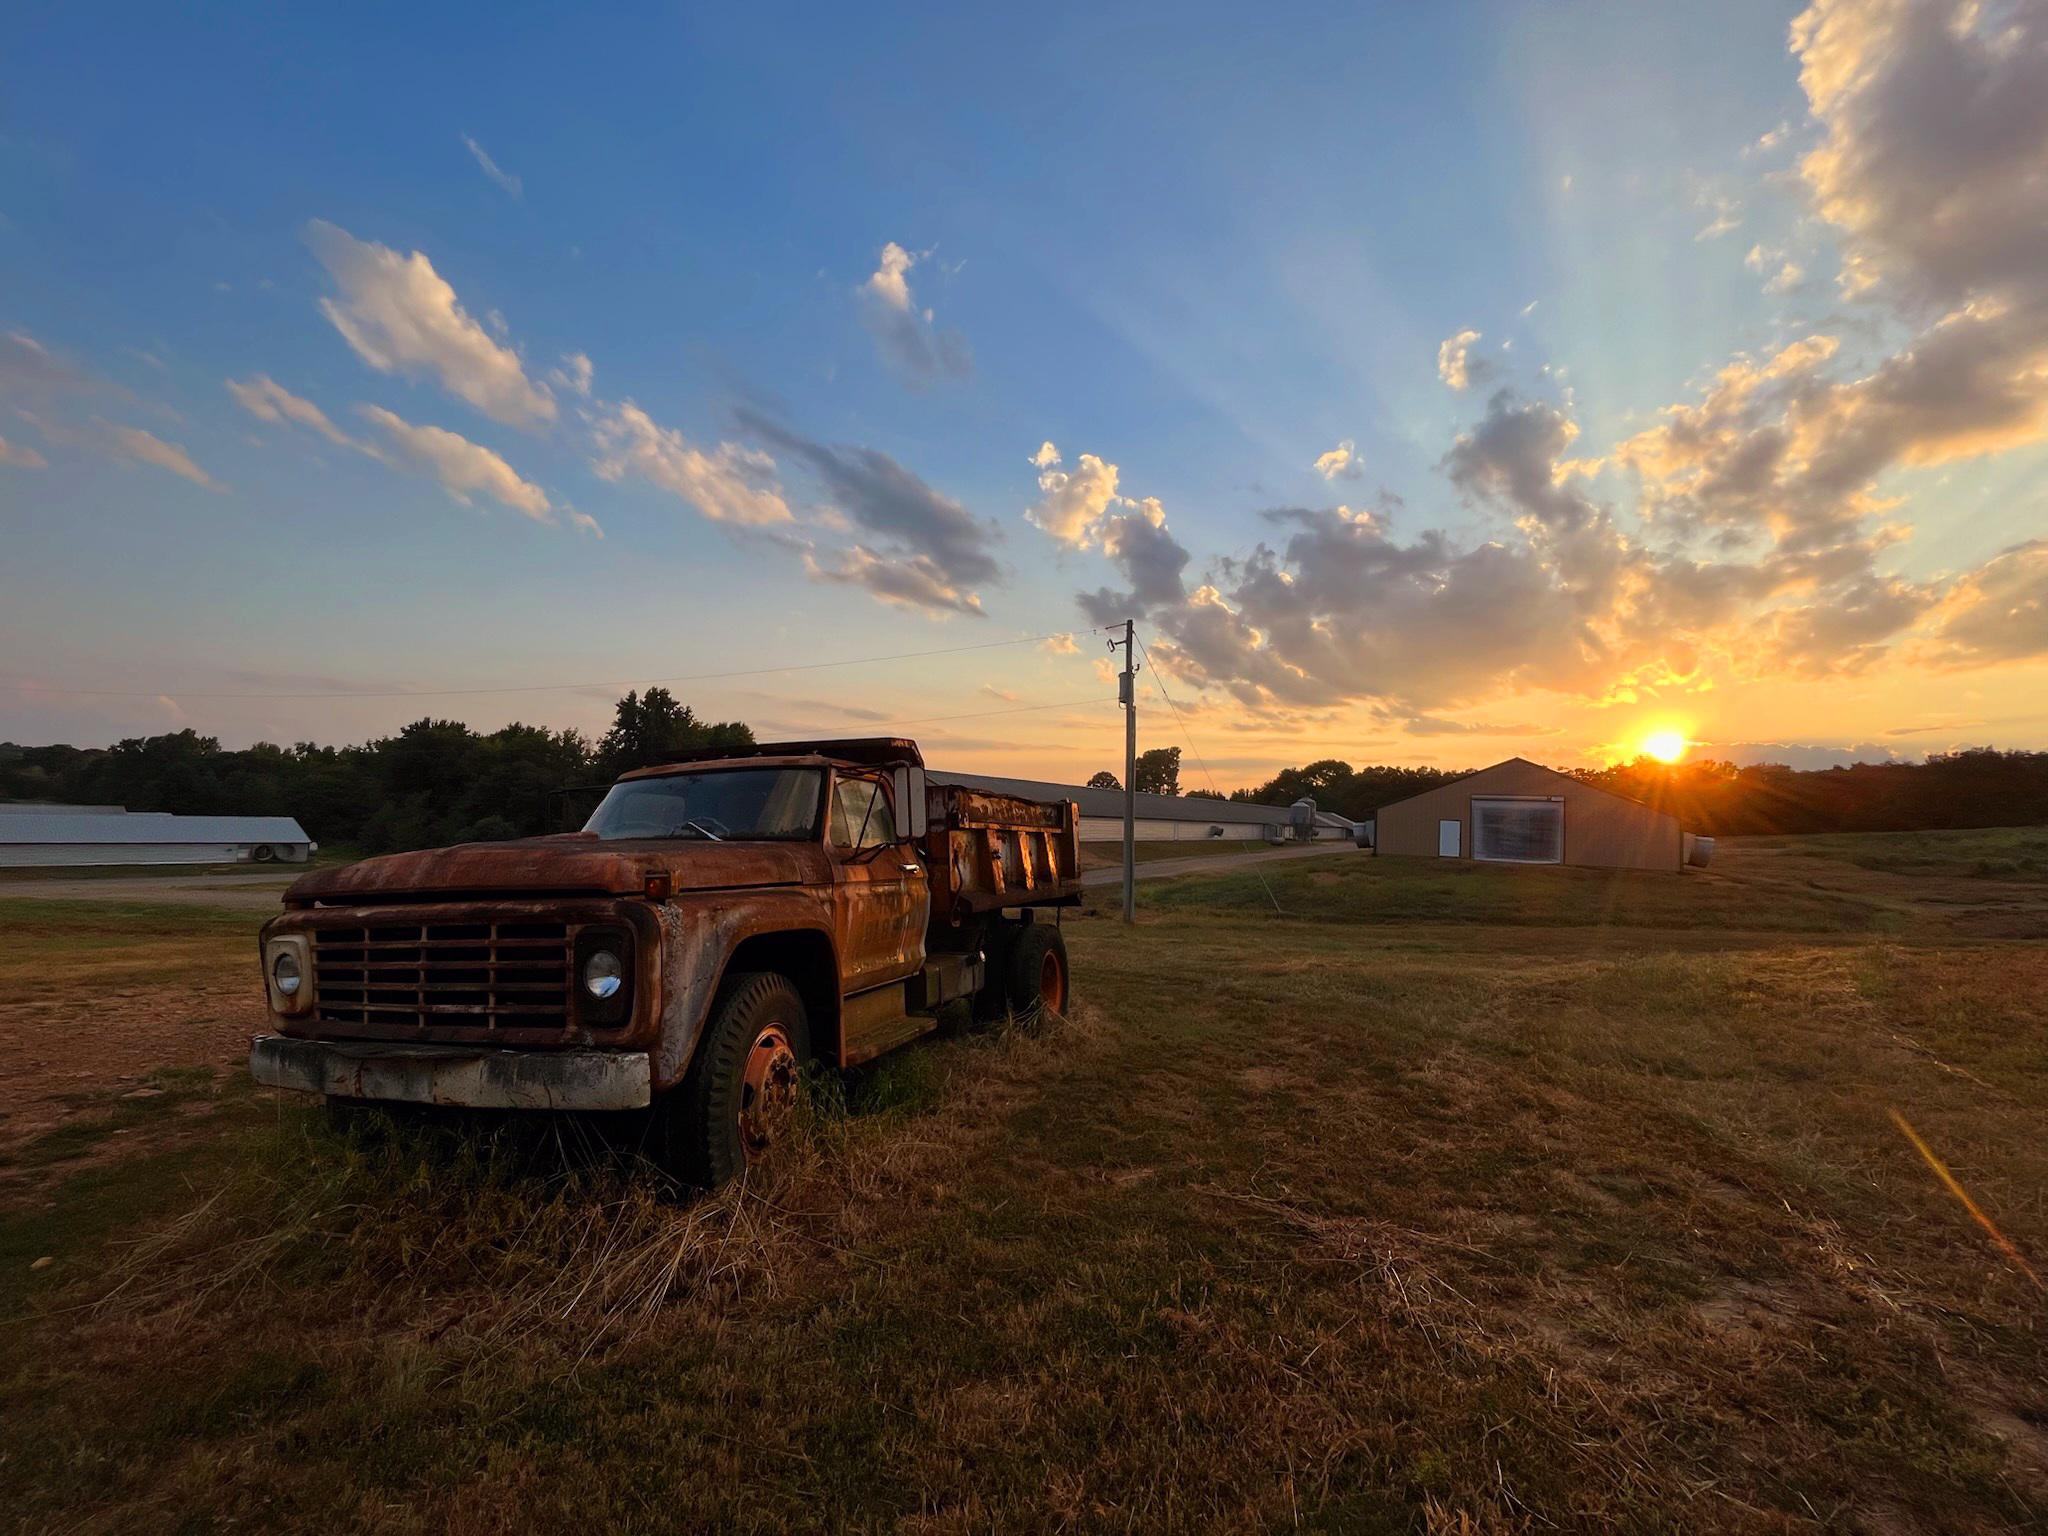 Old rusty truck in foreground, chicken houses in middle ground, sunset sky.